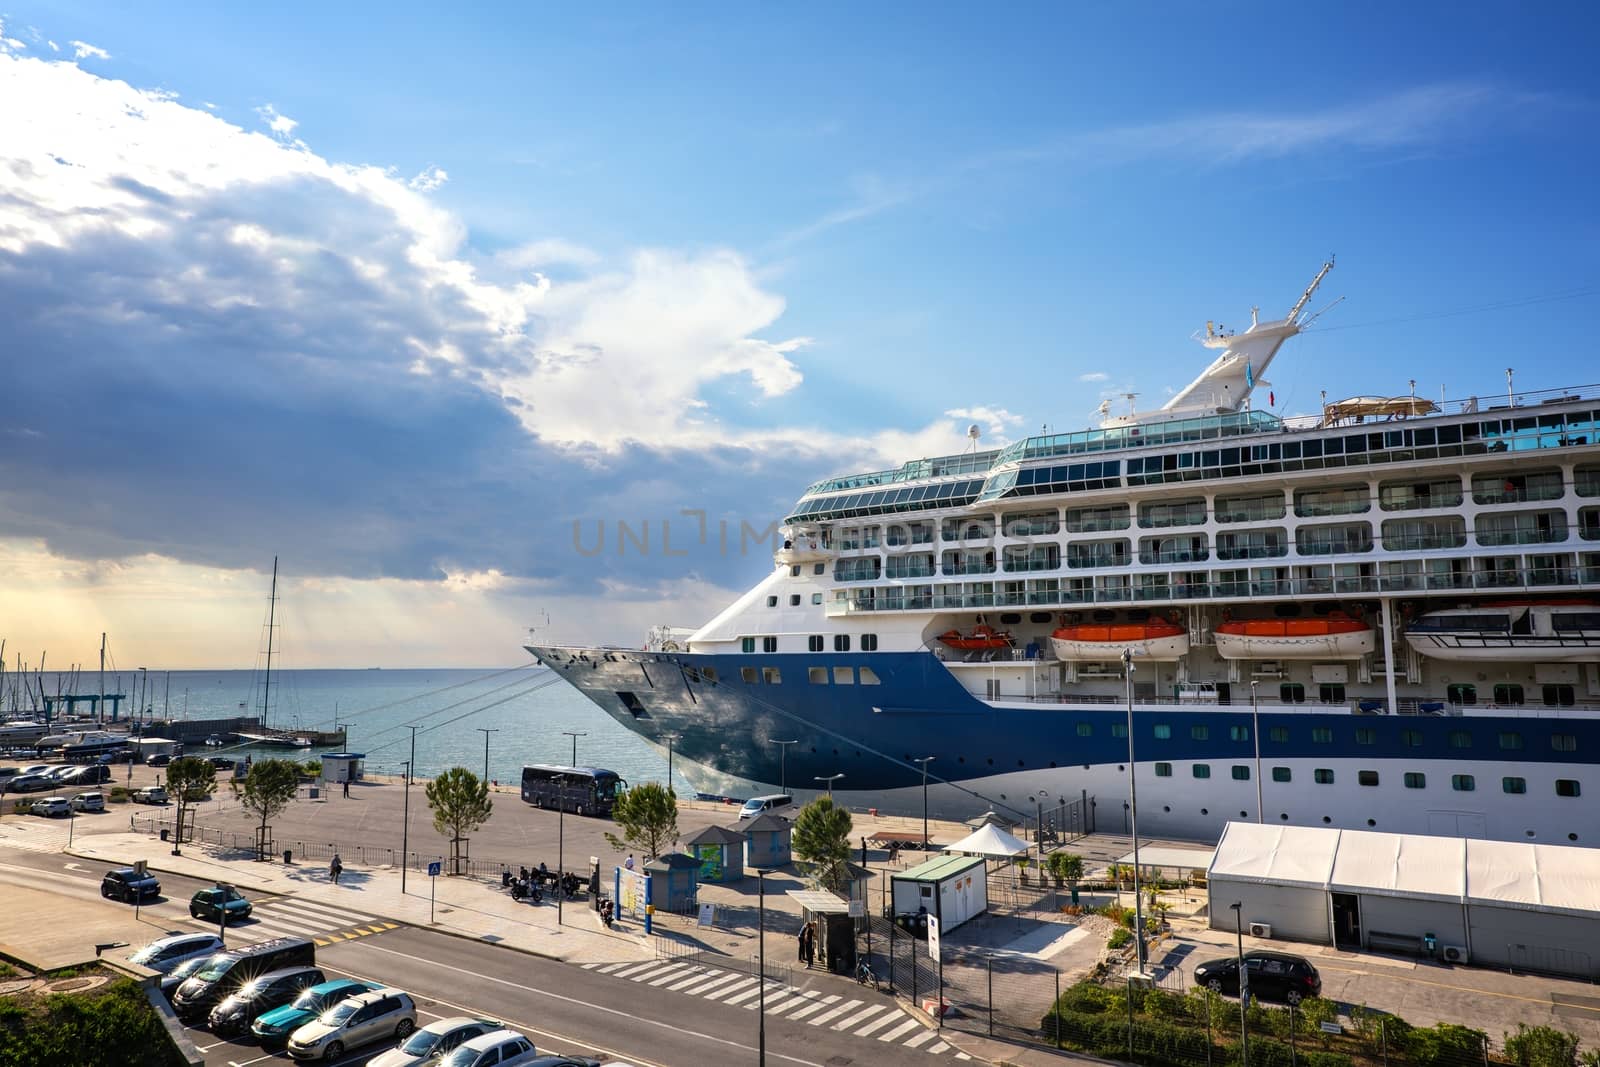 Large cruise ship anchored at the port by svedoliver